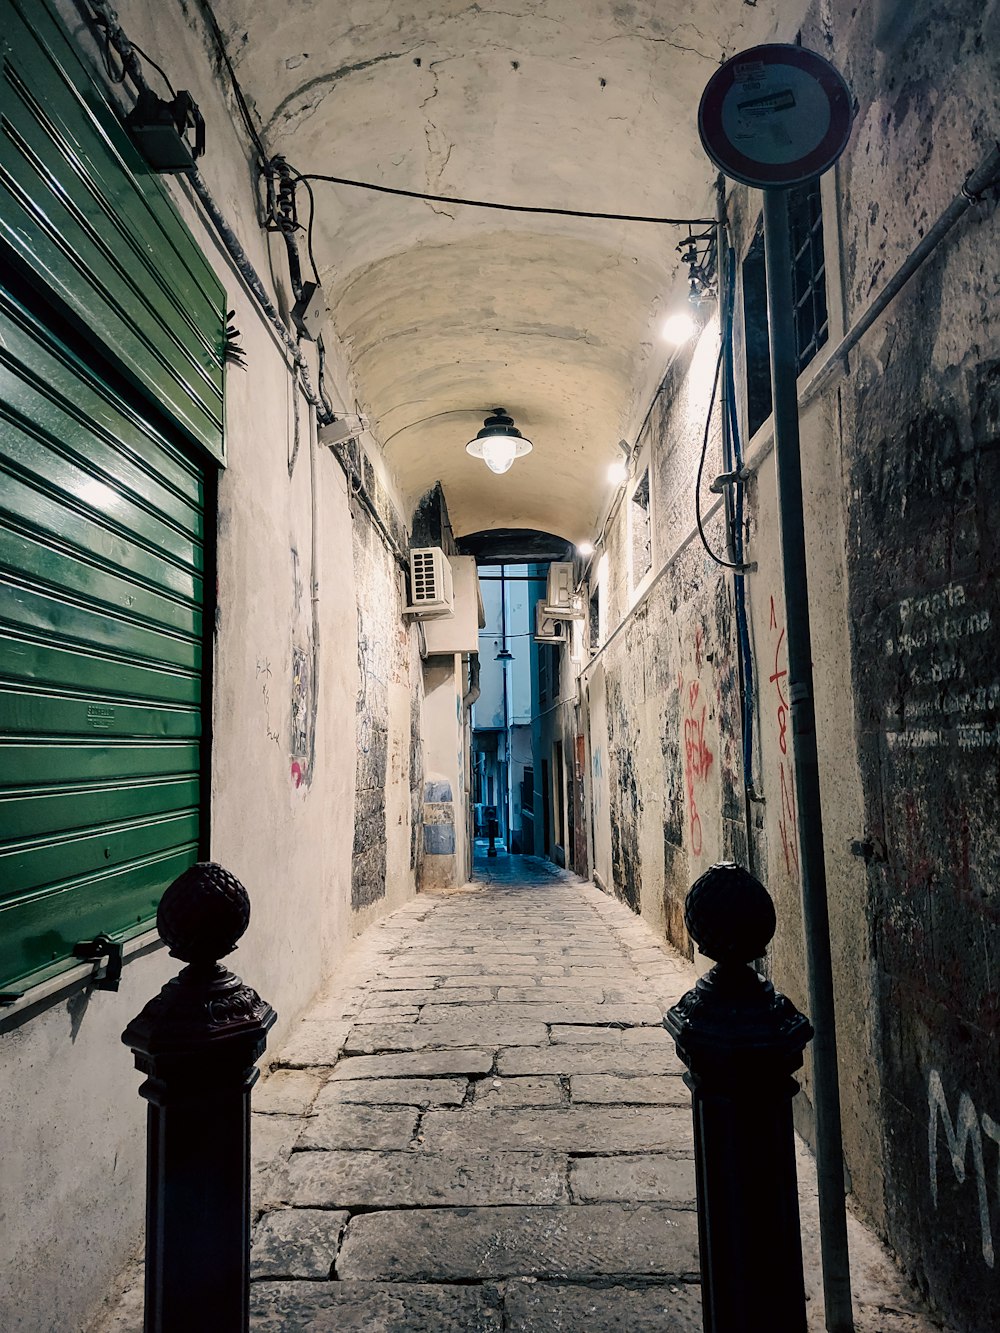 a narrow alley way with graffiti on the walls